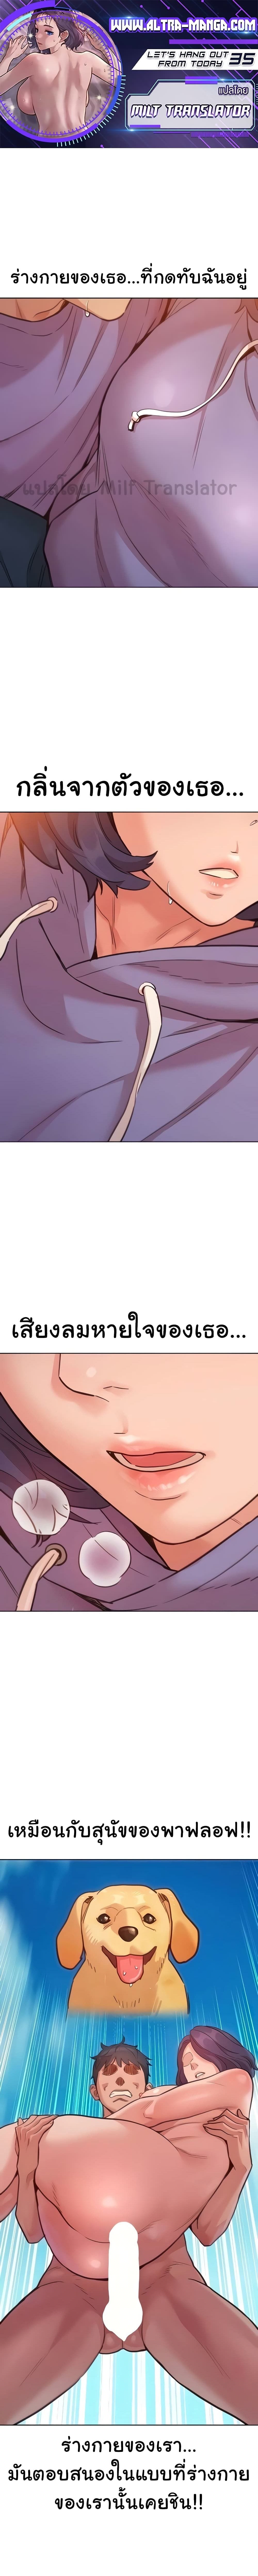 Let’s Hang Out from Today ตอนที่ 35 ภาพ 0